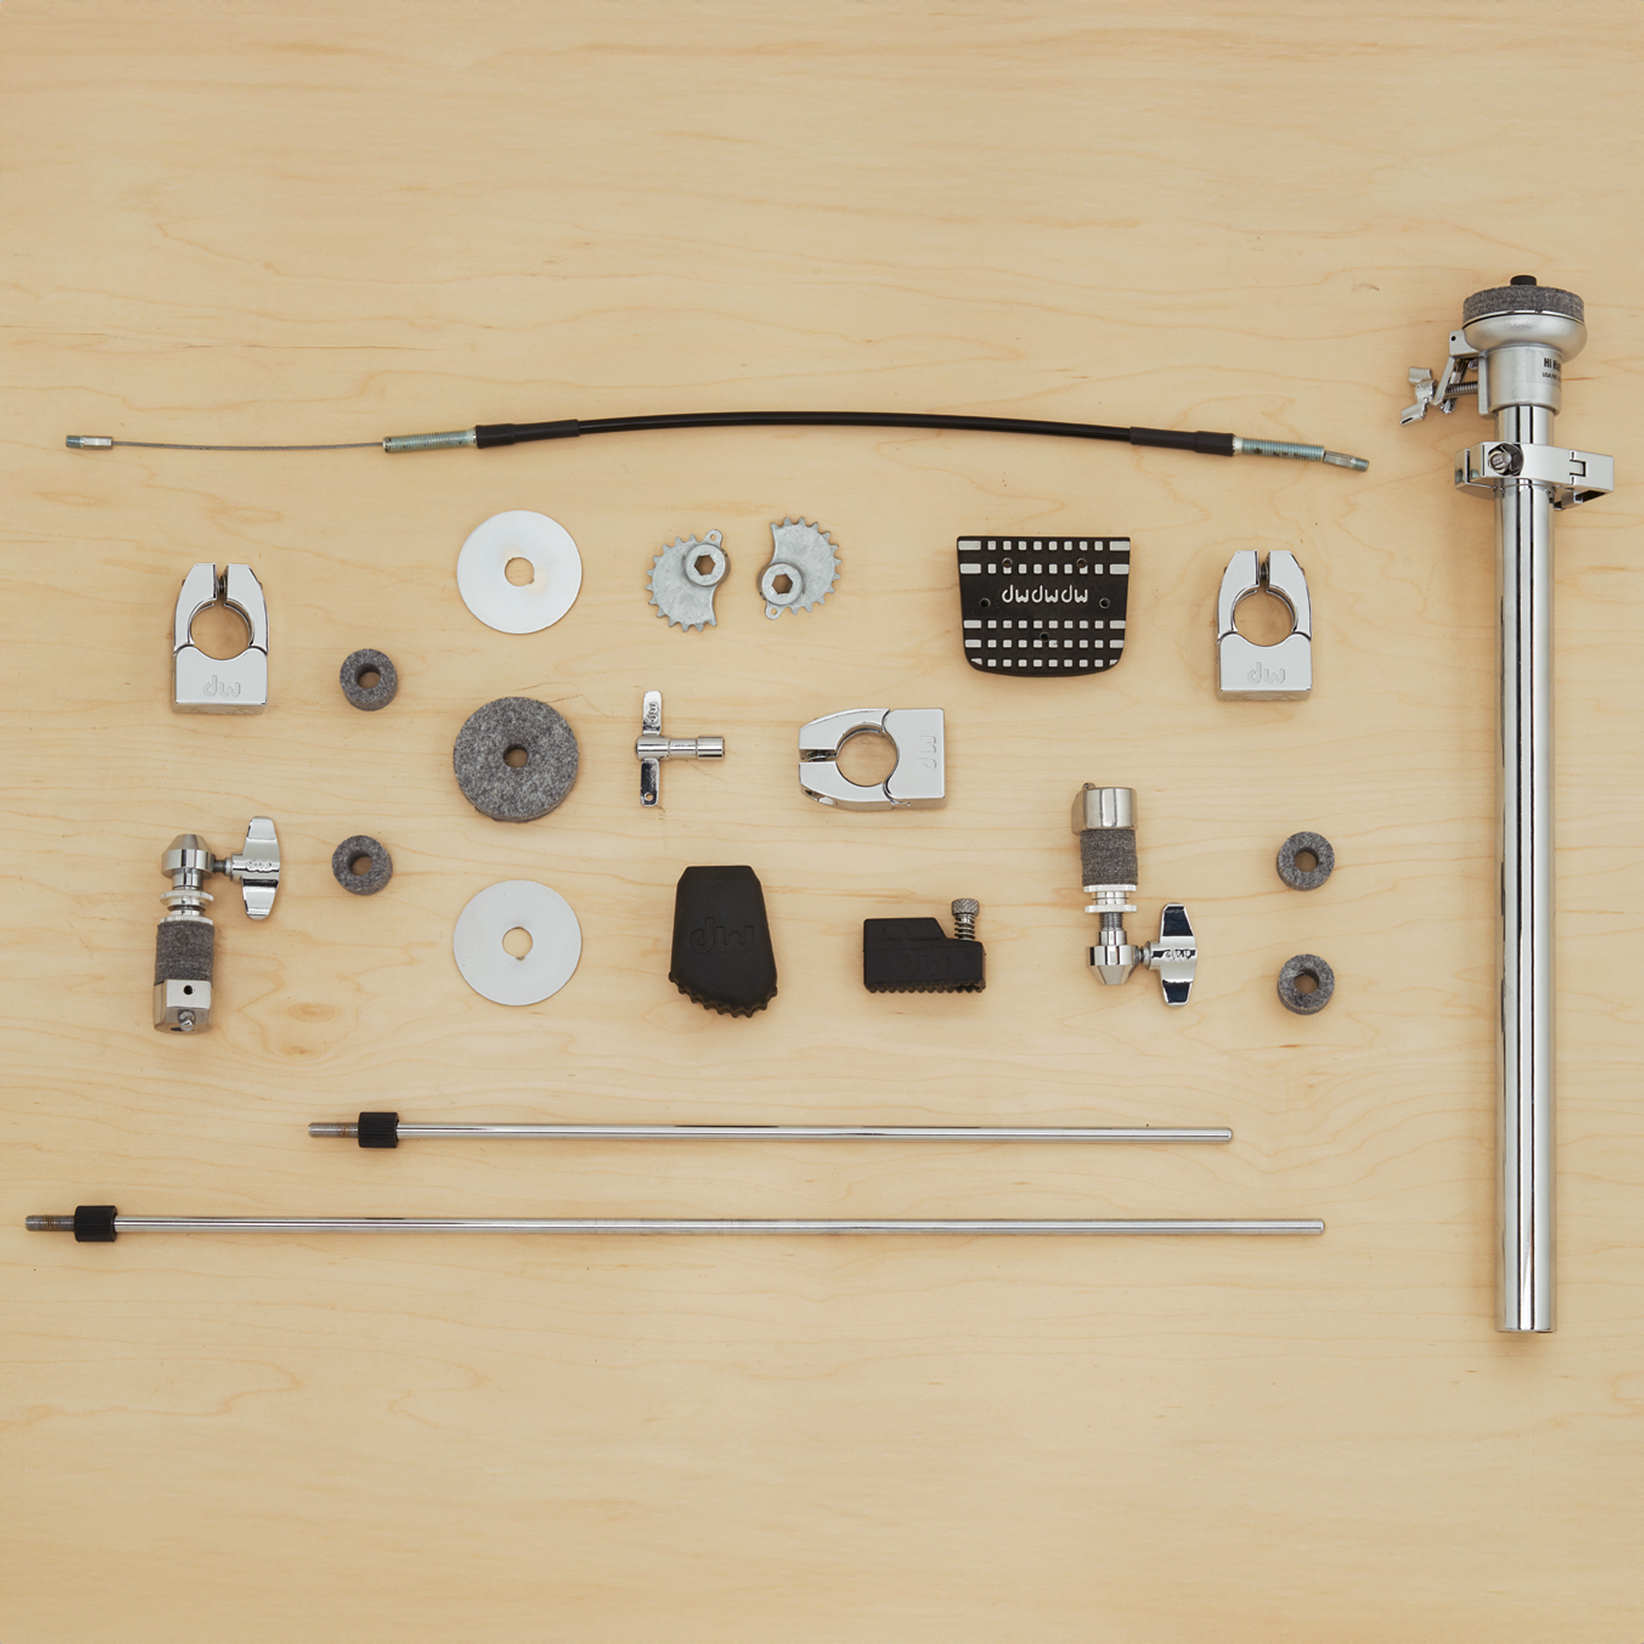 This photo contains DW hi-hat stand parts including heel plates, memory locks, clutches, tubing, pull rods, and more.